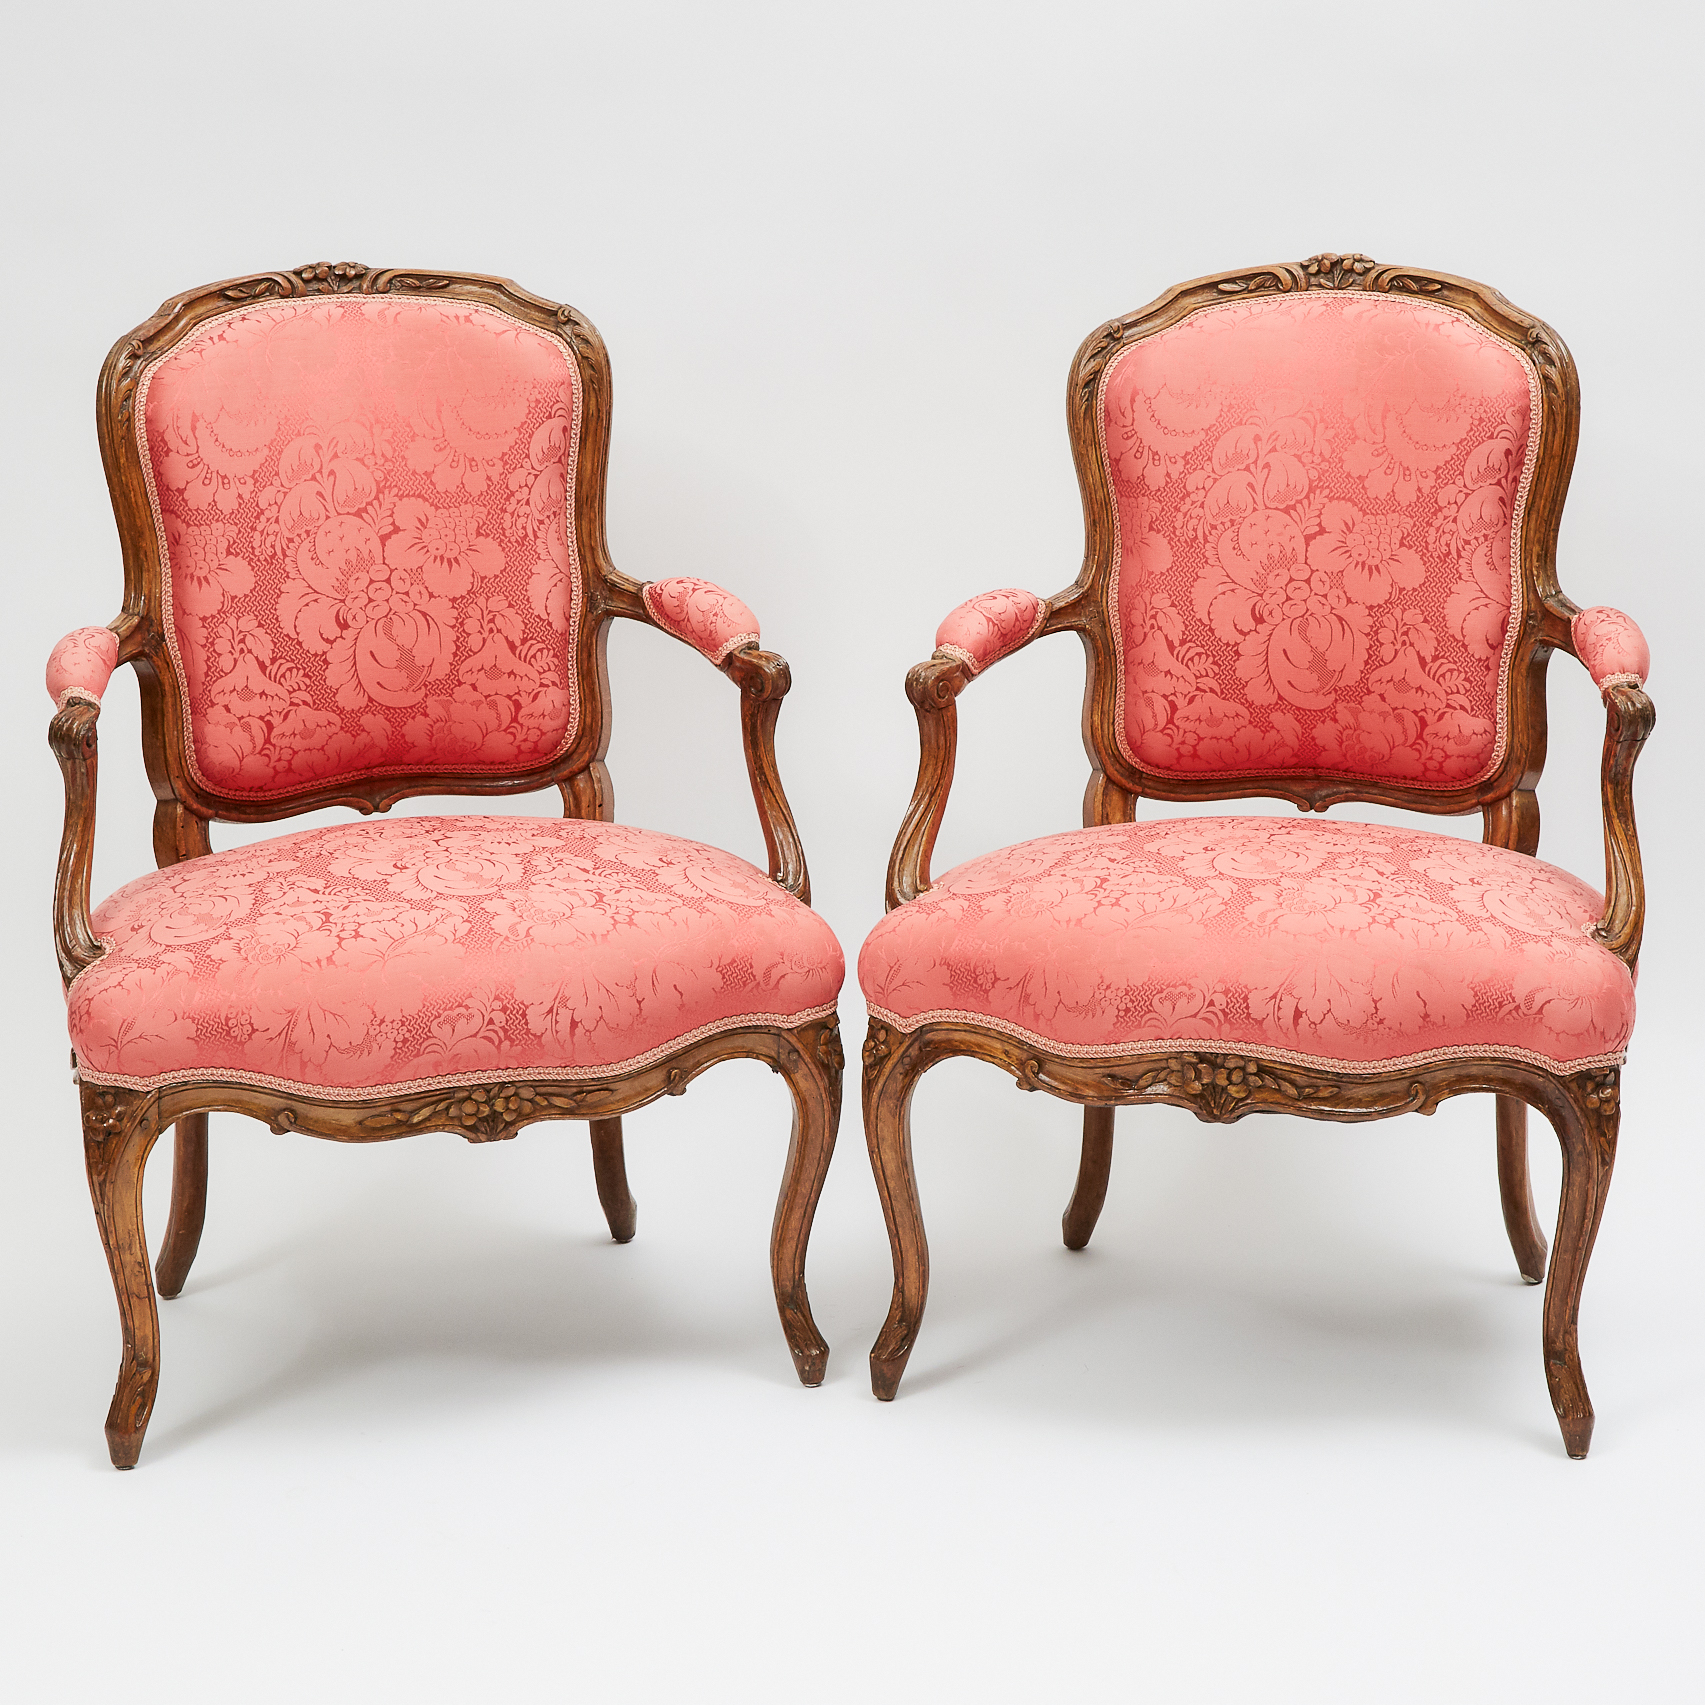 Pair of French Provincial Carved Walnut Fauteuils, 19th/early 20th century